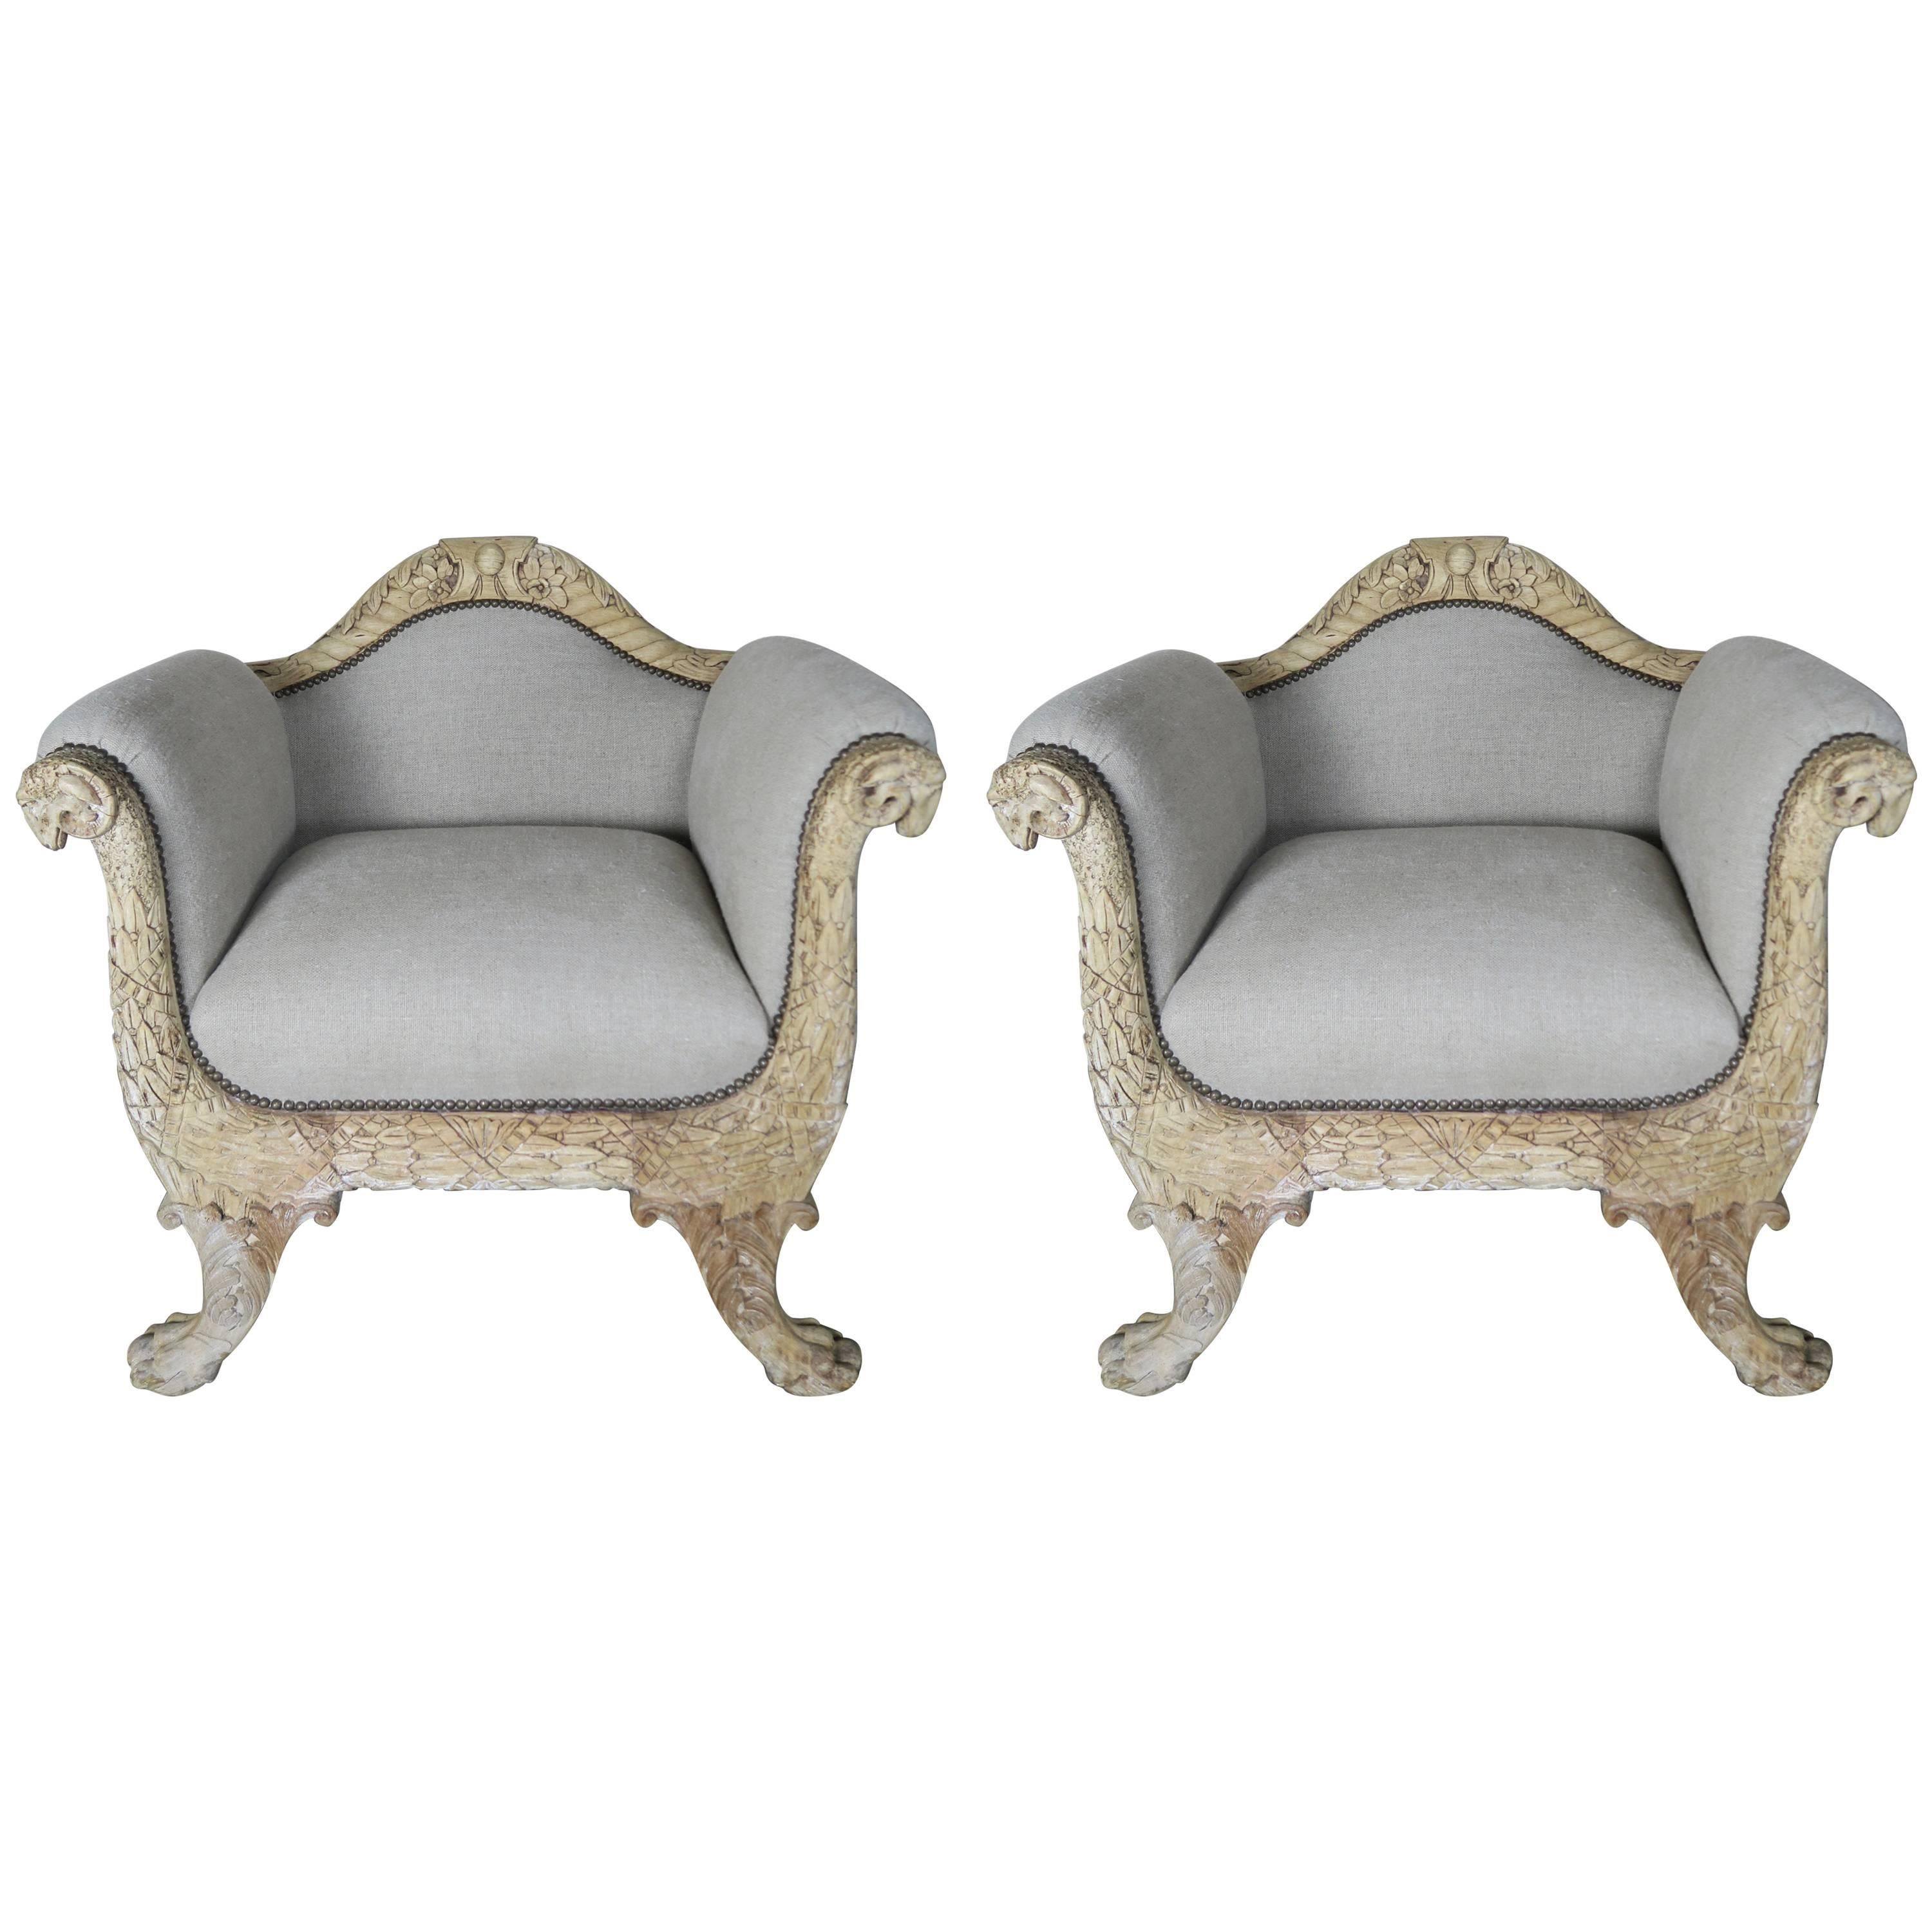 Pair of 19th Century French Carved Armchairs